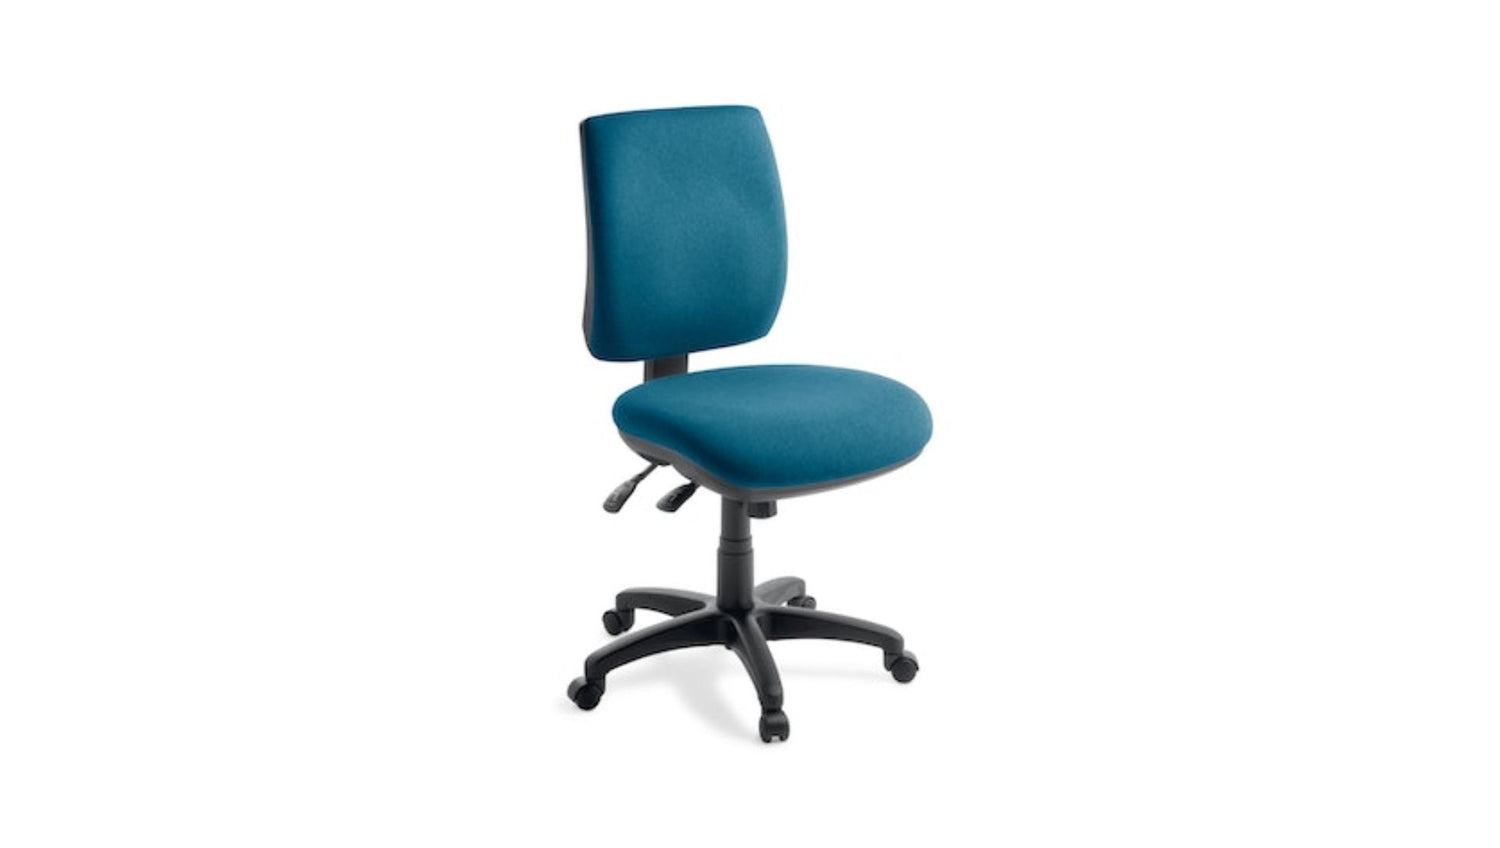 Seating 3.40 3 lever - Mid back / No Sport Chair